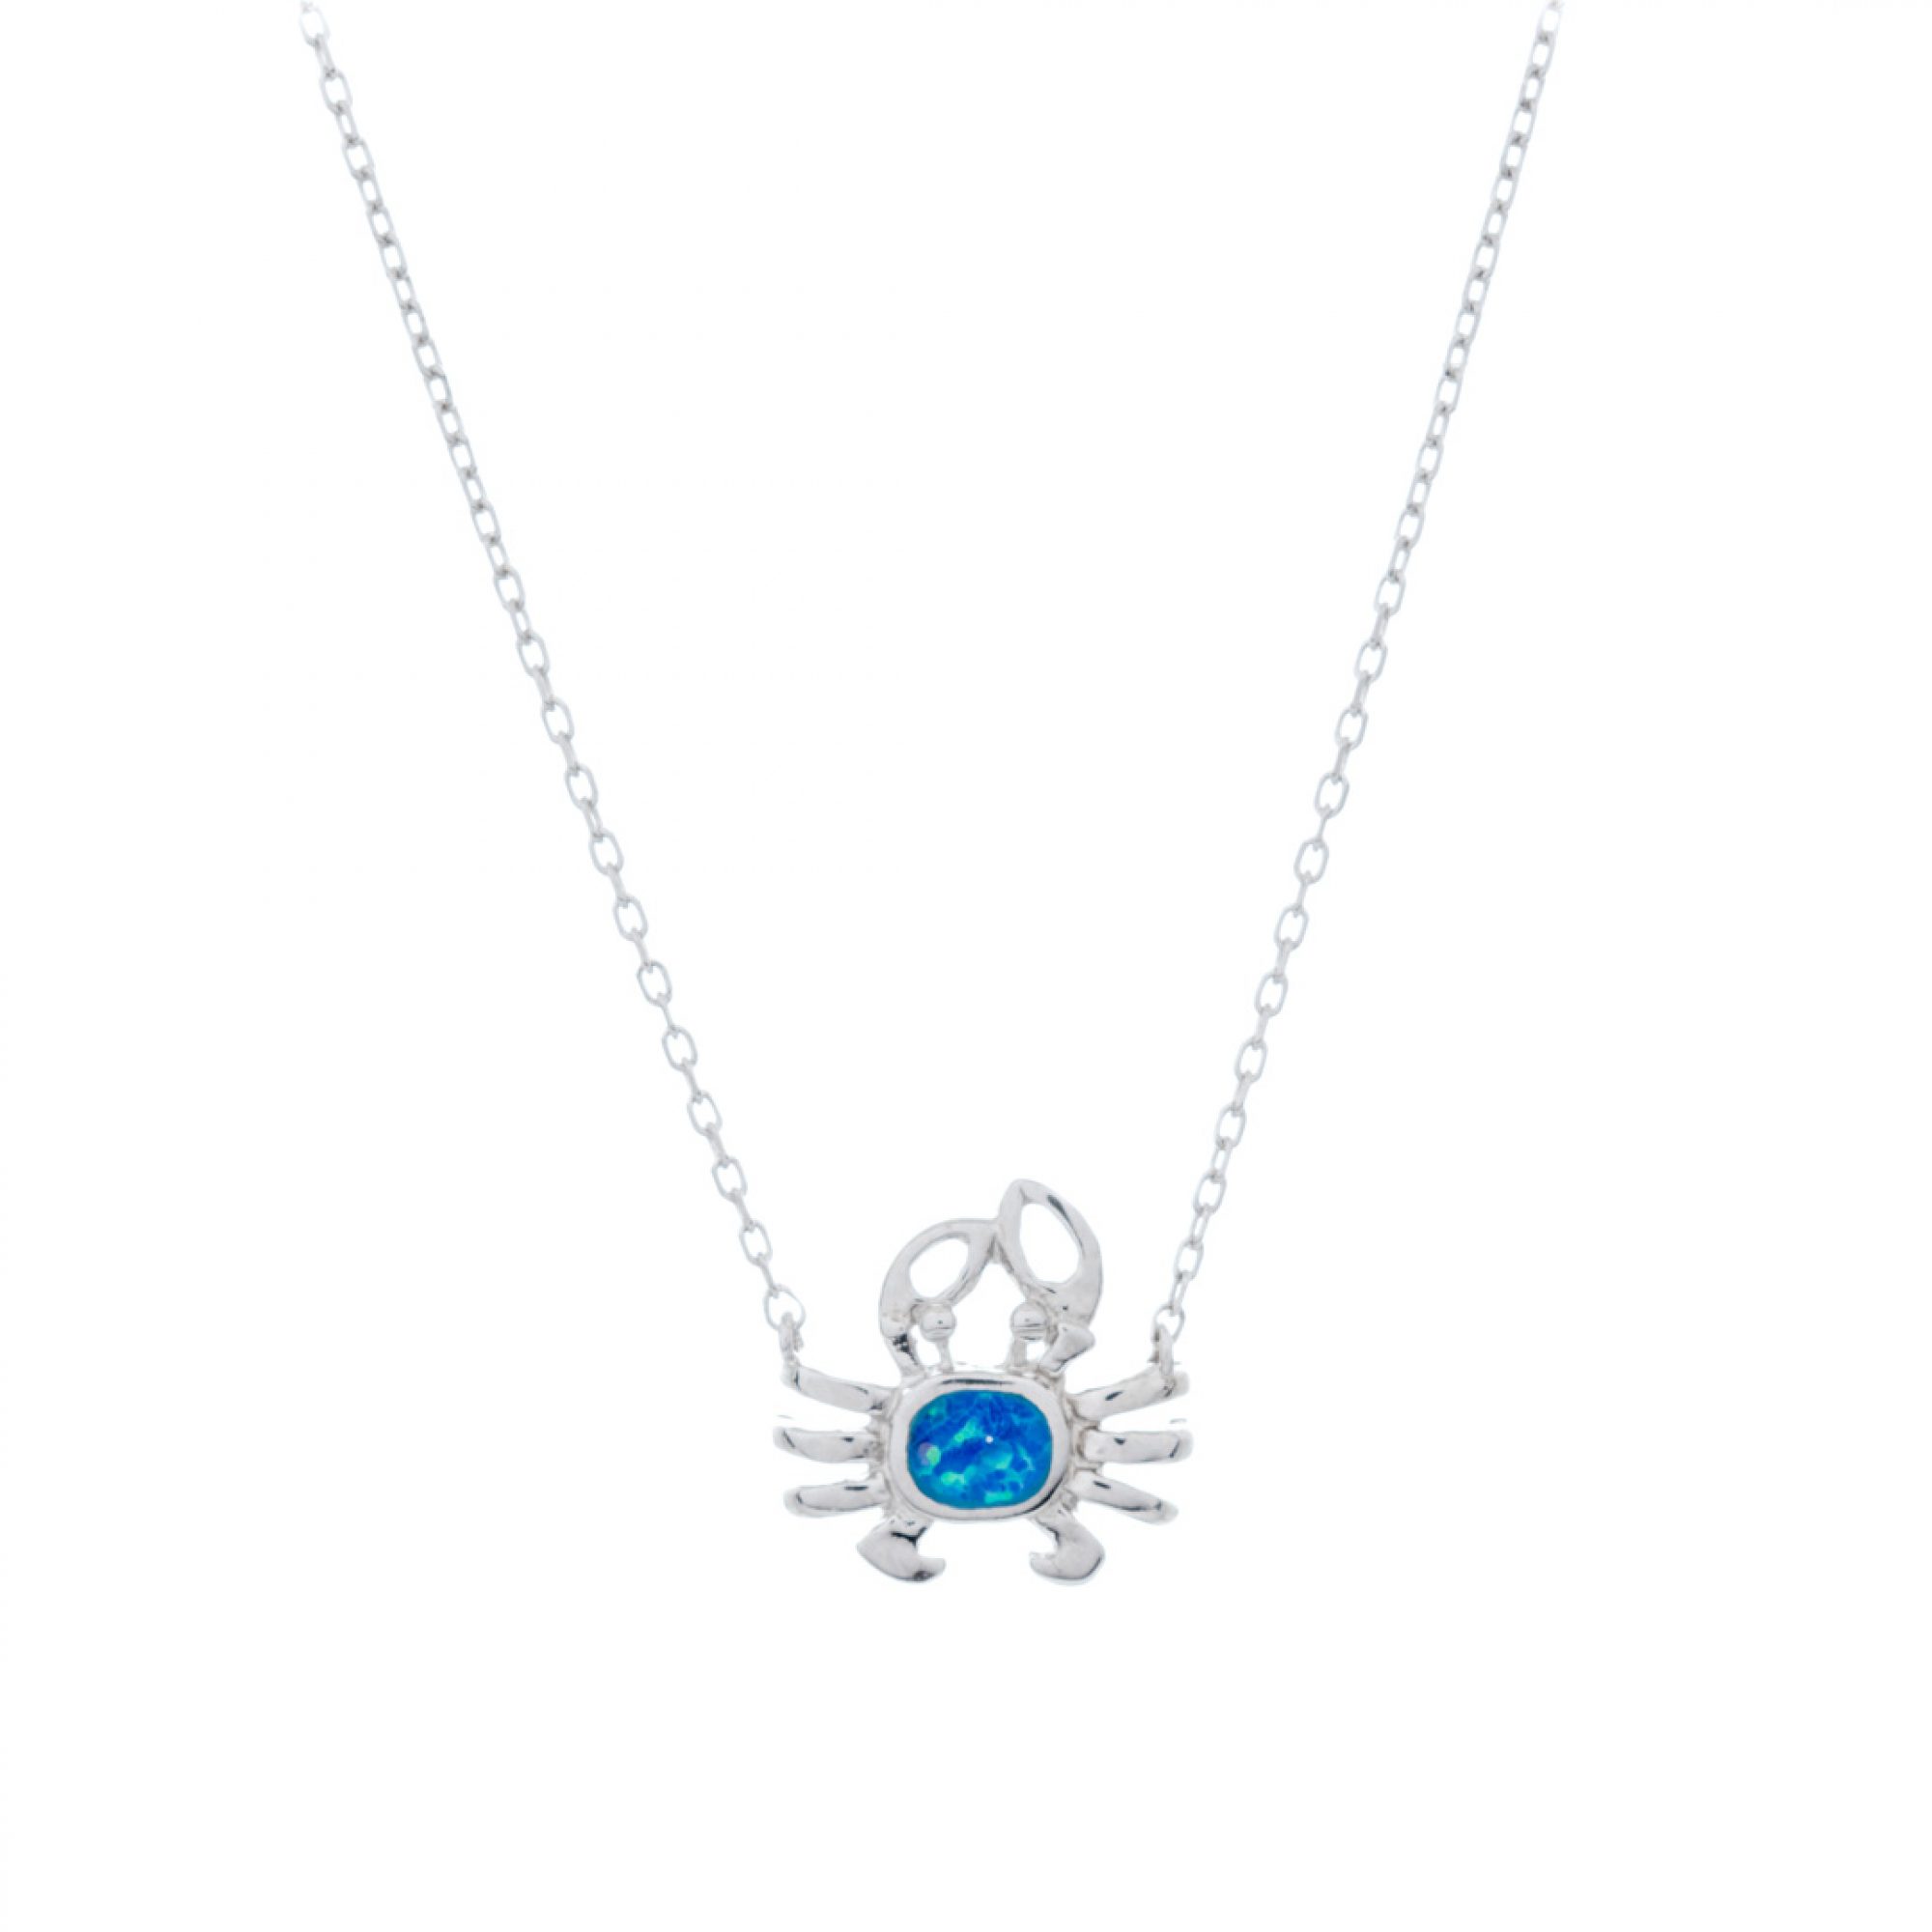 Opal crab necklace